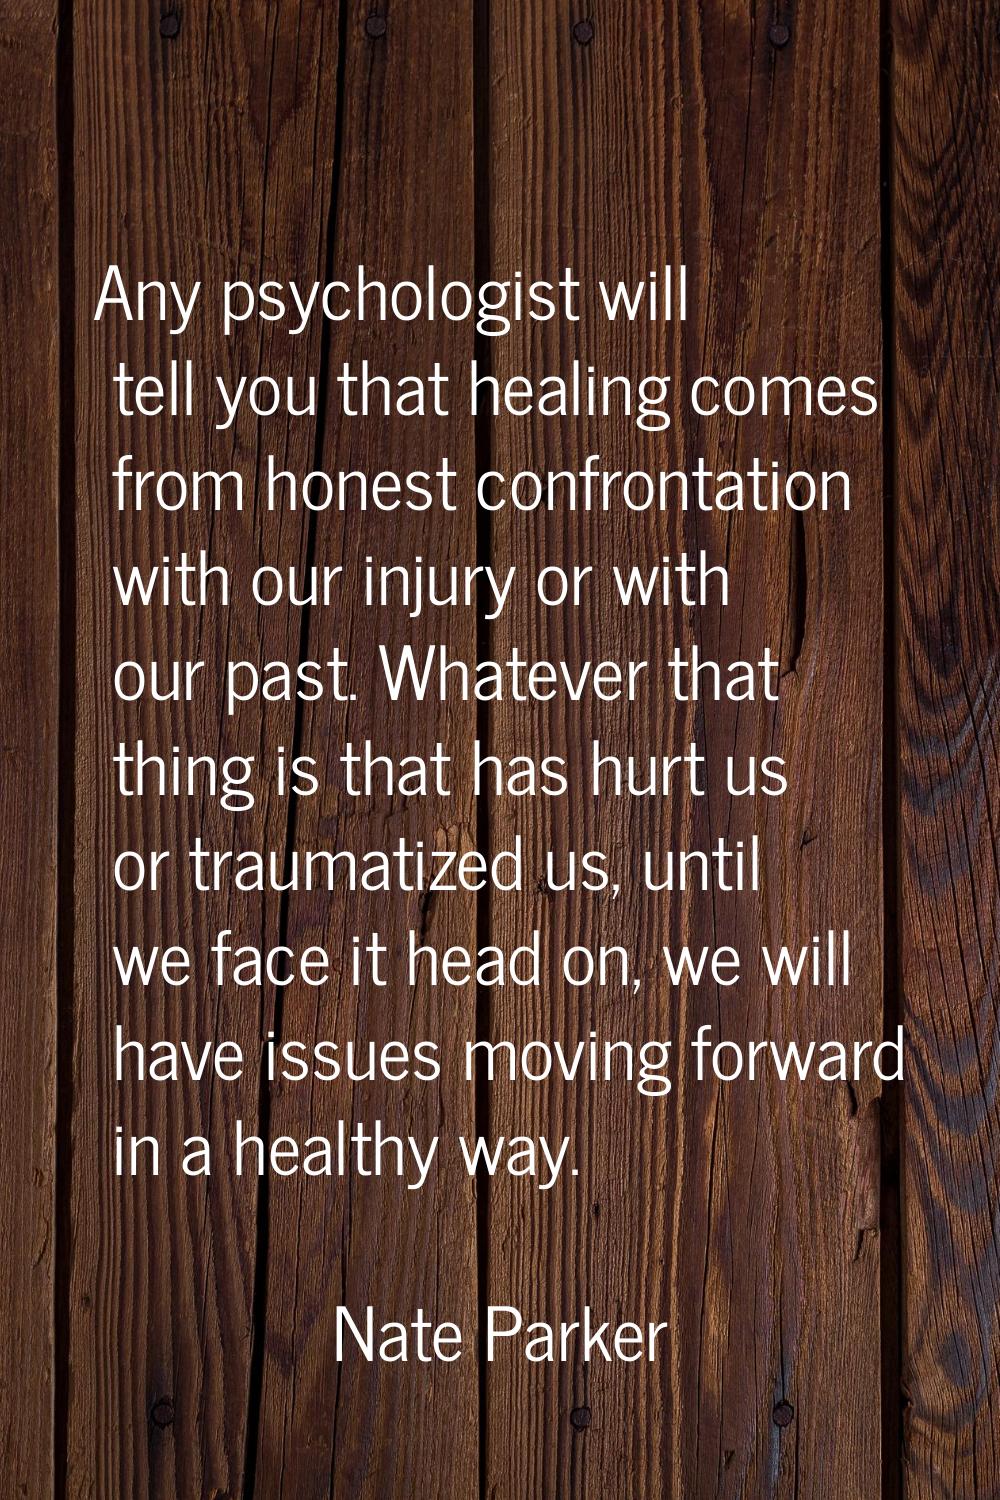 Any psychologist will tell you that healing comes from honest confrontation with our injury or with